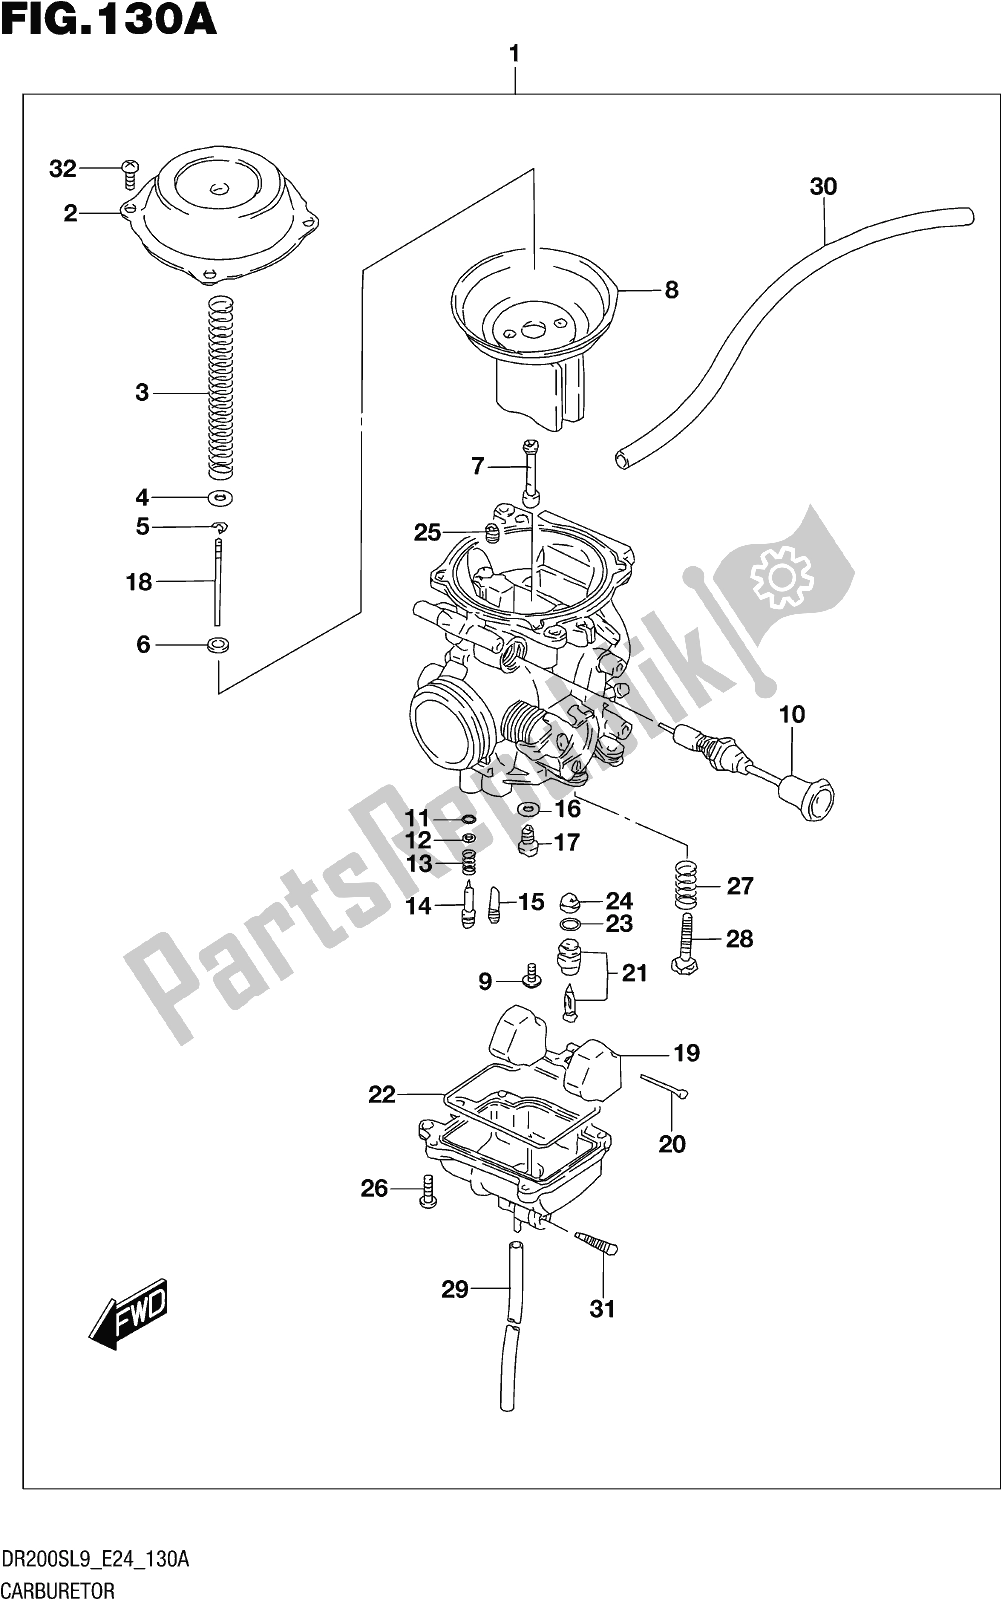 All parts for the Fig. 130a Carburetor of the Suzuki DR 200S 2019